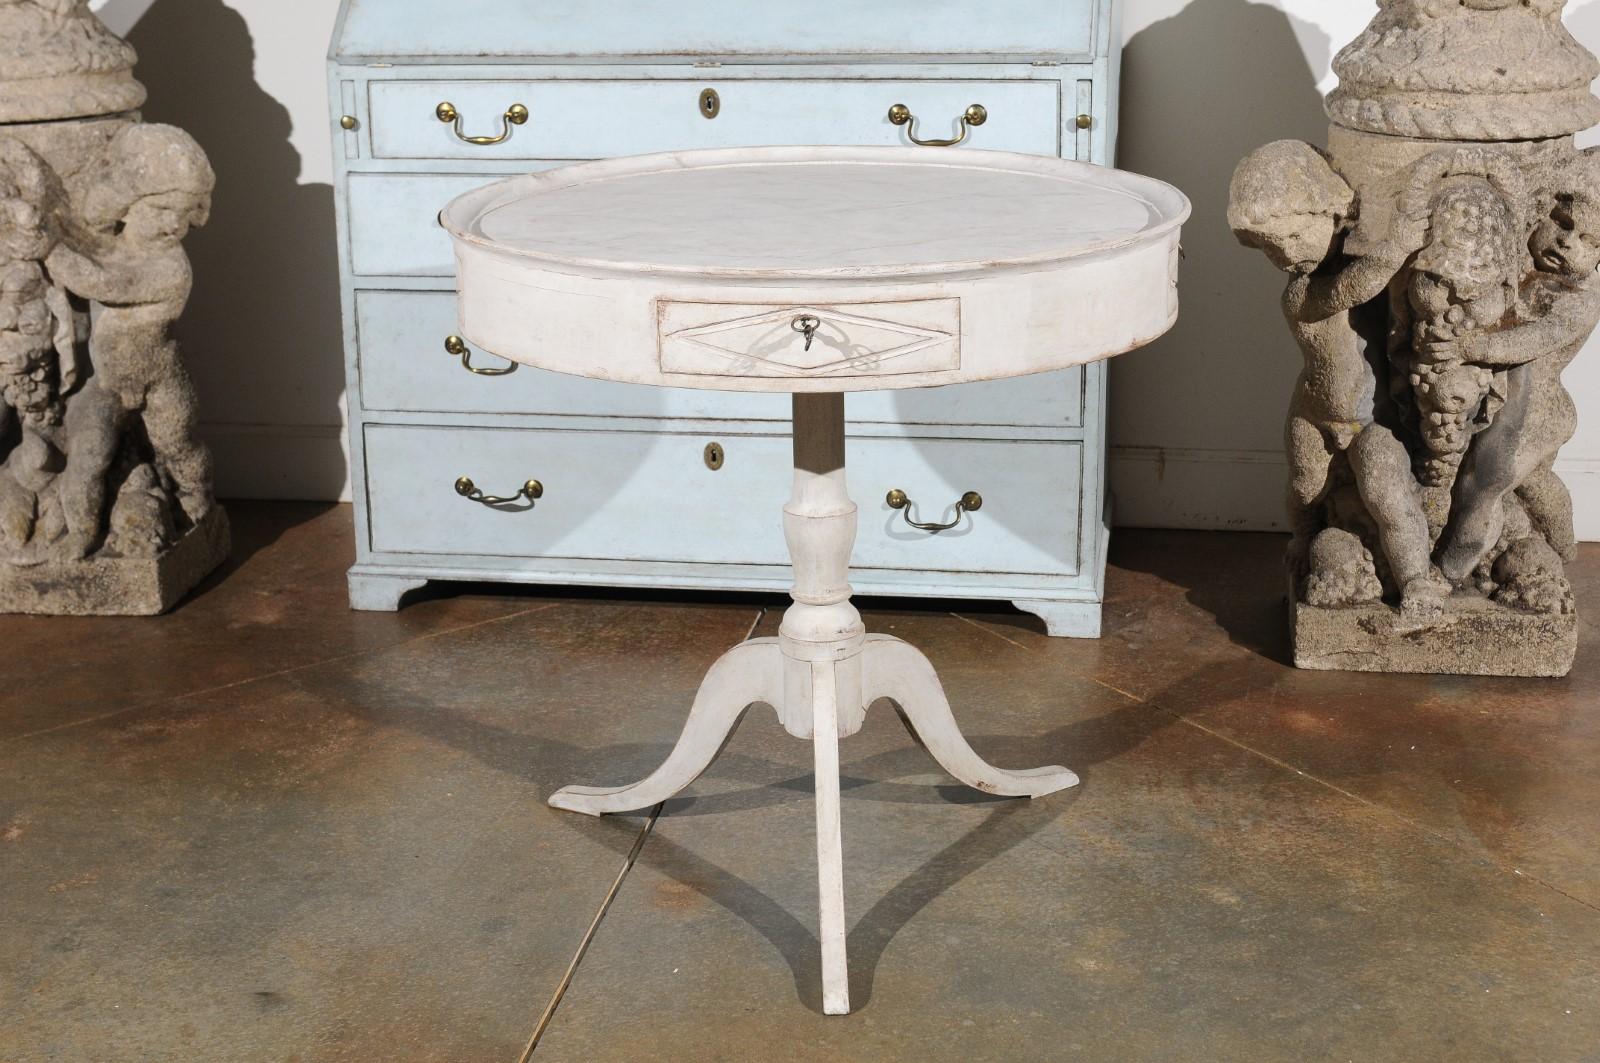 A Swedish painted round pedestal game table from the late 19th century, with marbleized tray top, four drawers and tripod base. Born in Sweden in the last quarter of the 19th century, this elegant side table features a faux-marble painted tray top,